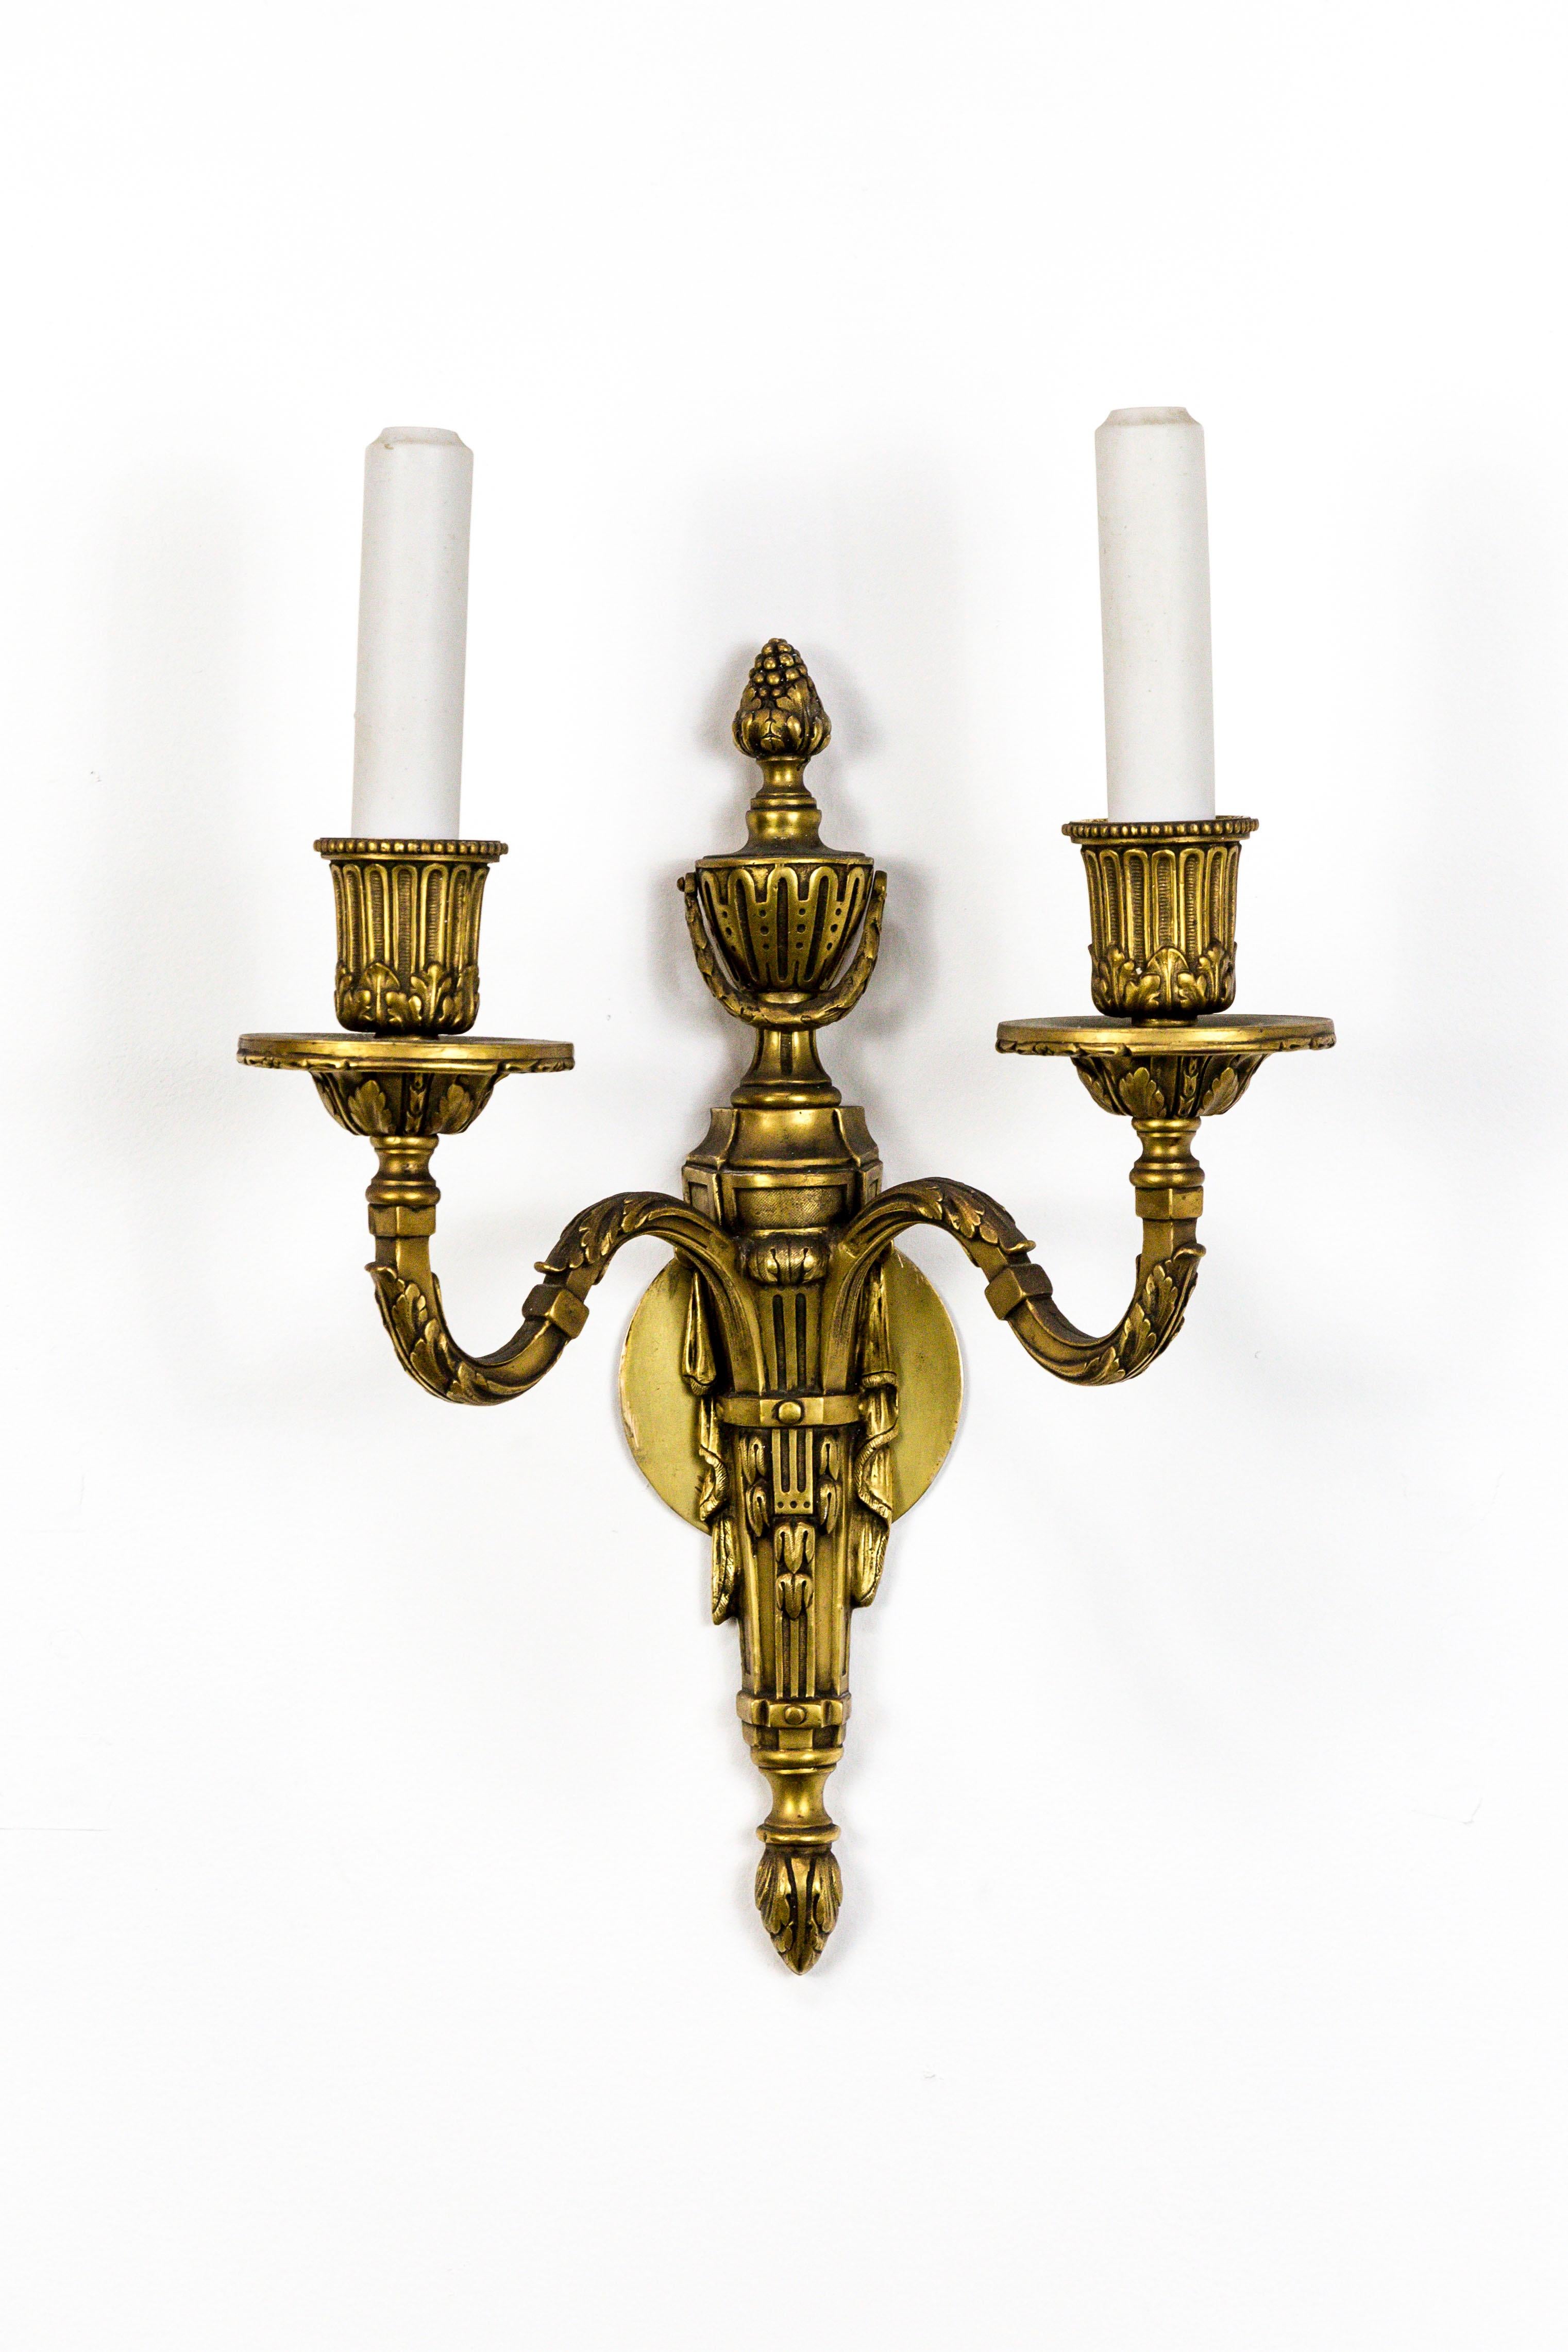 Regal, 1940s, two-light Empire style candelabra sconces in gilt bronze with ceramic candle covers. Adorned with acanthus leaf swag, flora and reed detail, and urn and acorn top. American. Measures: 15.5” height x 10.5” width x 5.75